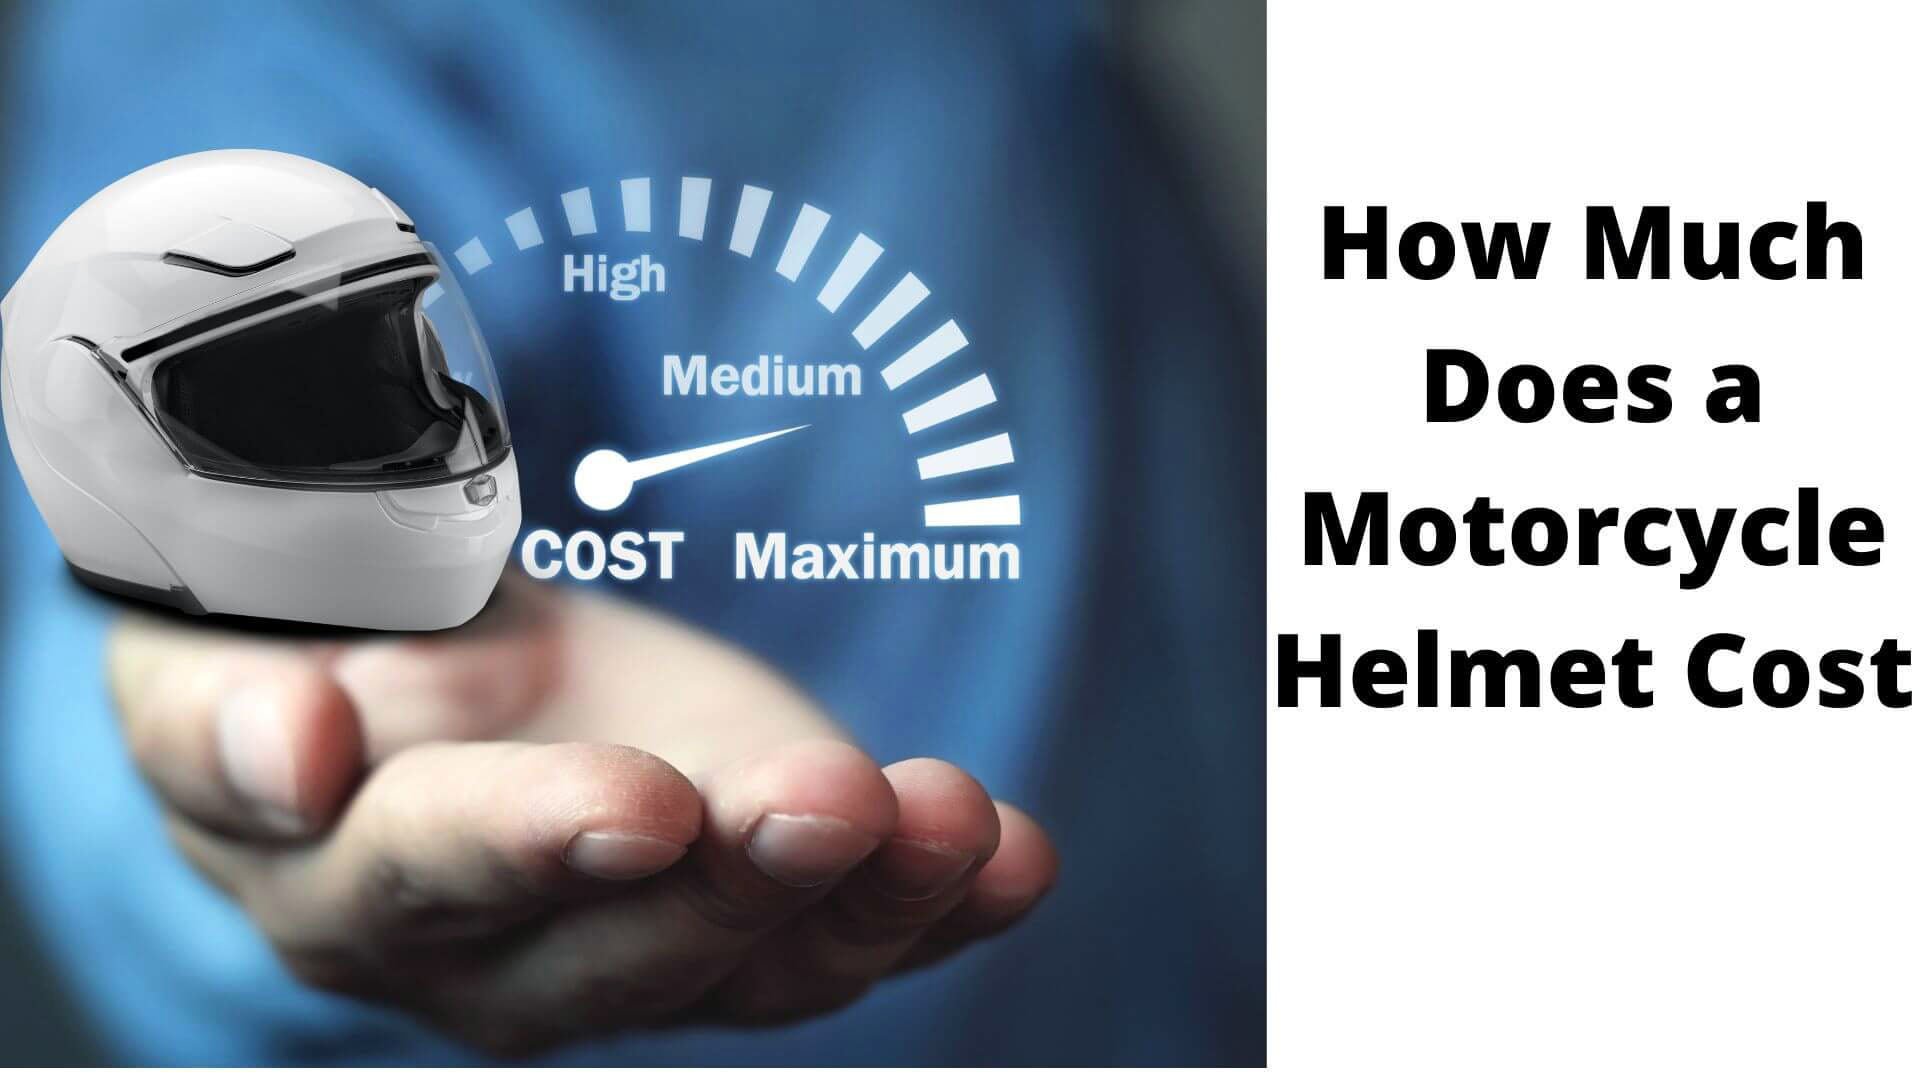 How Much Does a Motorcycle Helmet Cost? I Tell You Exactly!